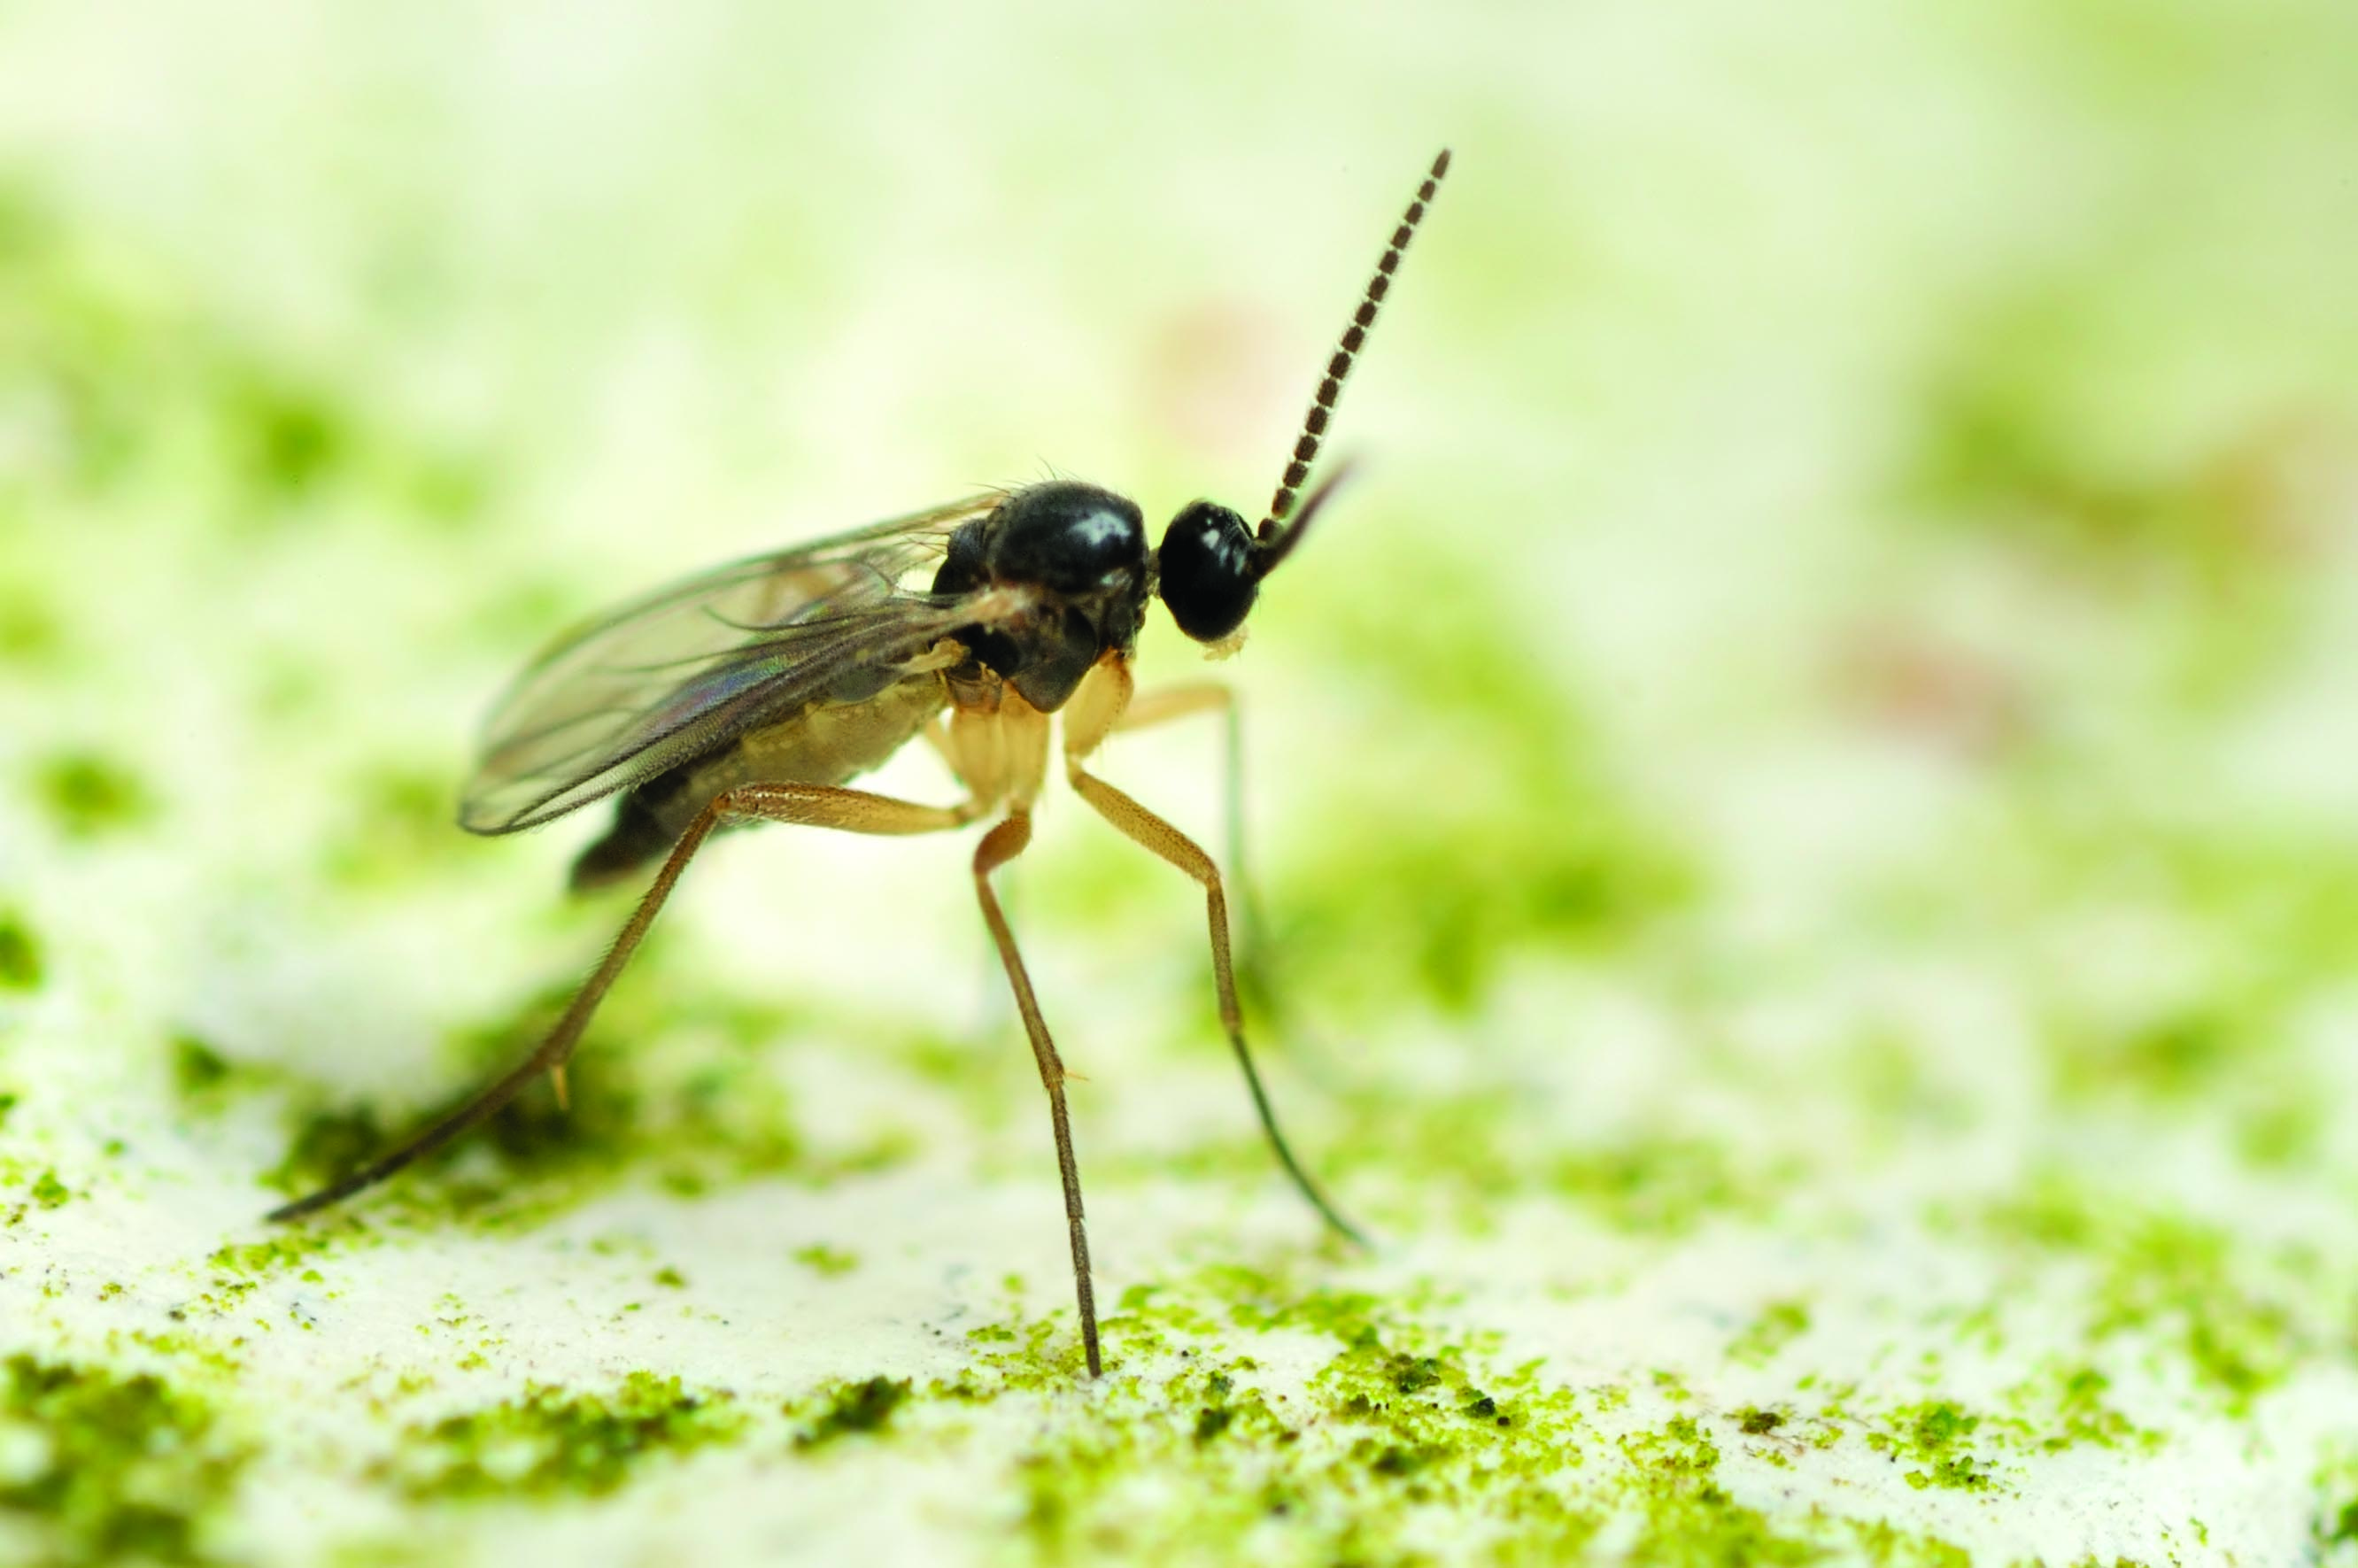 Treatment for fungus gnat in garden